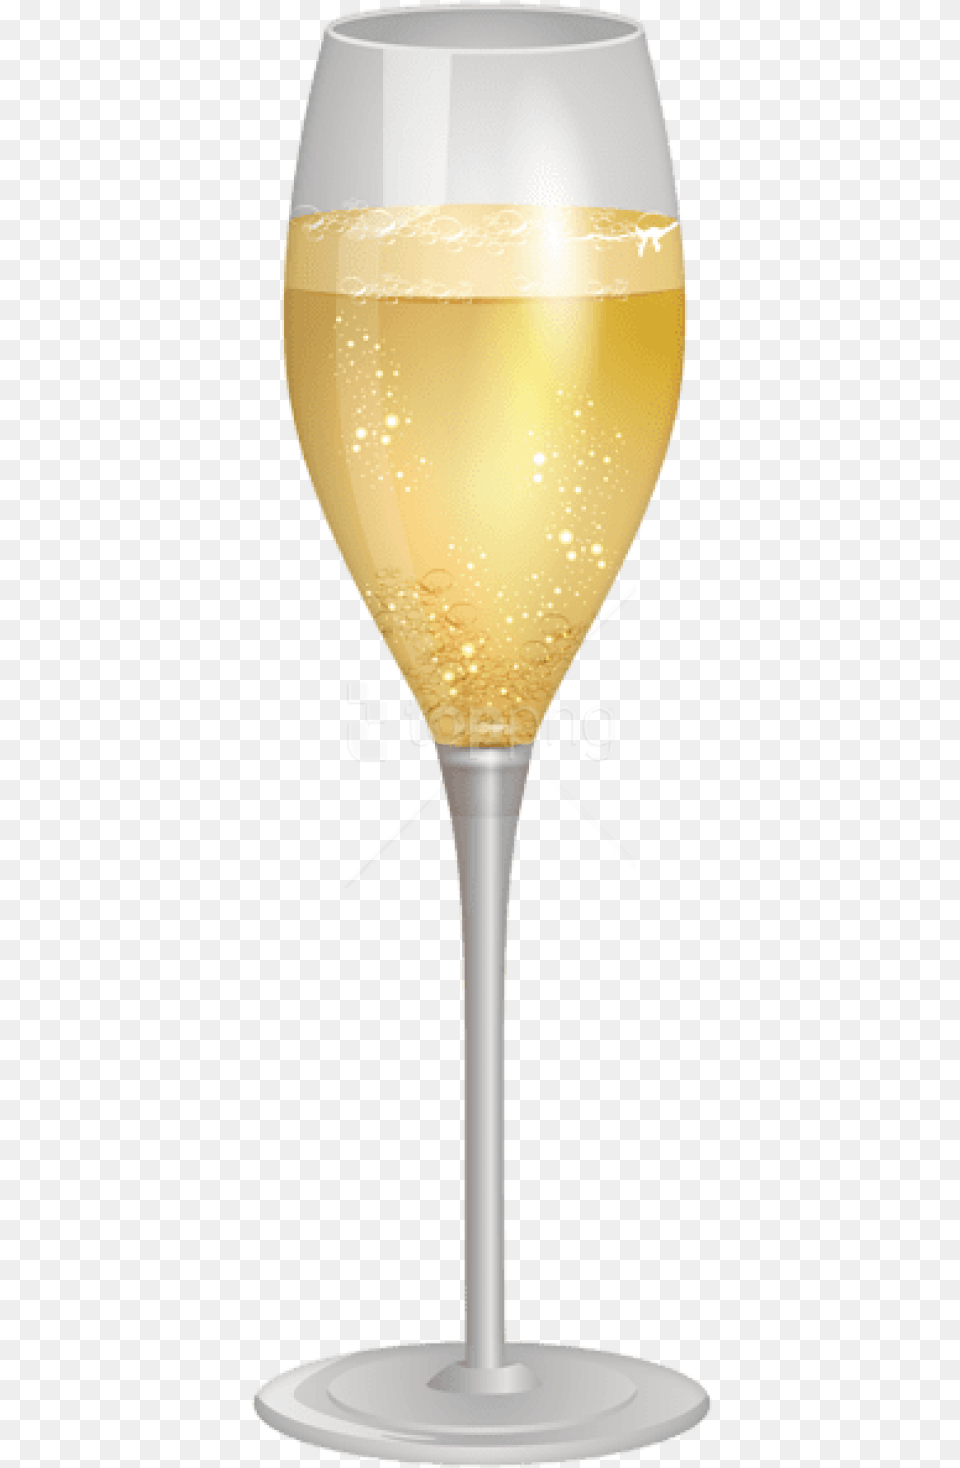 Glass With Champagne Images Background Champagne Stemware, Alcohol, Beverage, Liquor, Wine Png Image